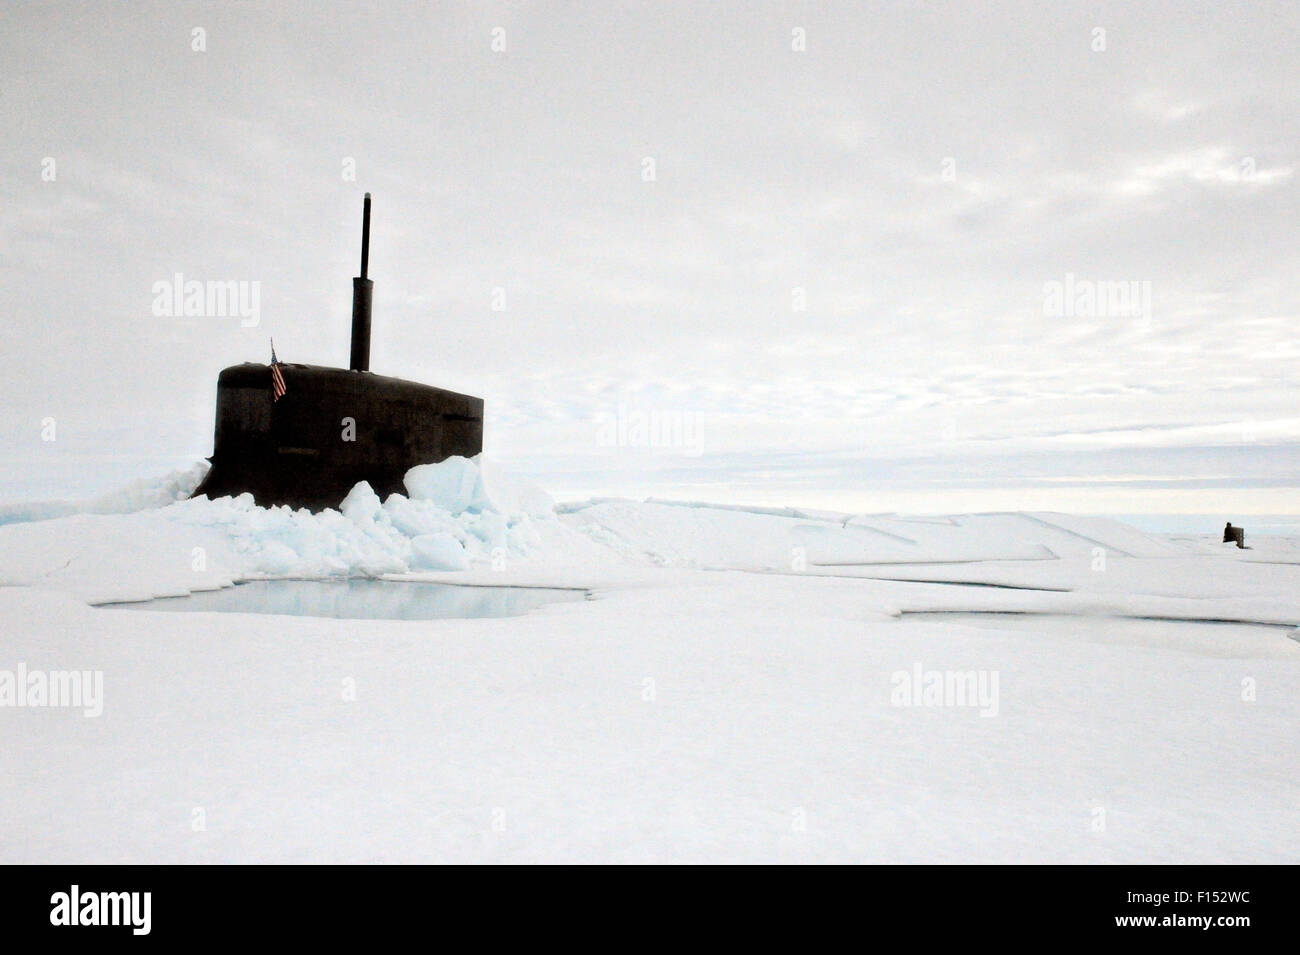 US Navy fast attack nuclear submarine USS Seawolf surfaces through arctic ice in the North Pole August 1, 2015. Stock Photo